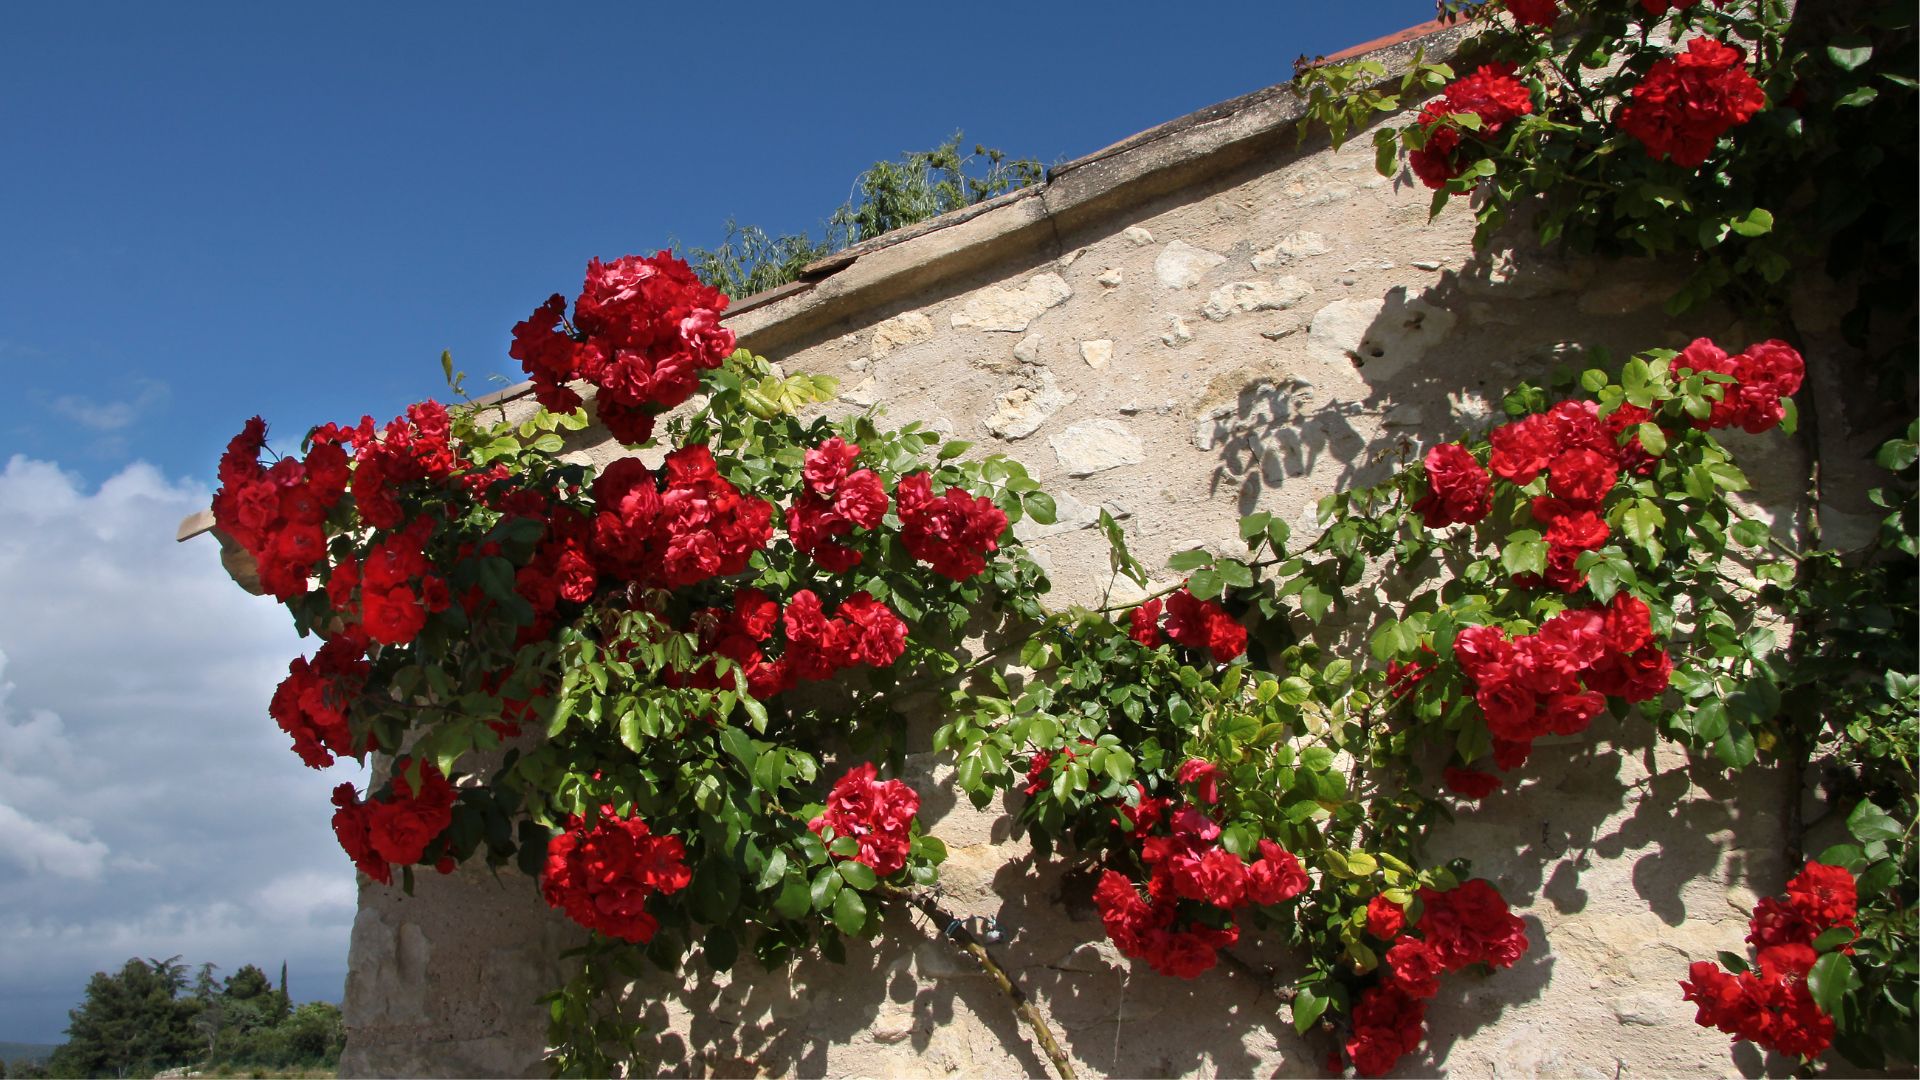 Master The Art Of Cultivating Climbing Roses And Watch Your Outdoor Space Blossom Beyond Limits